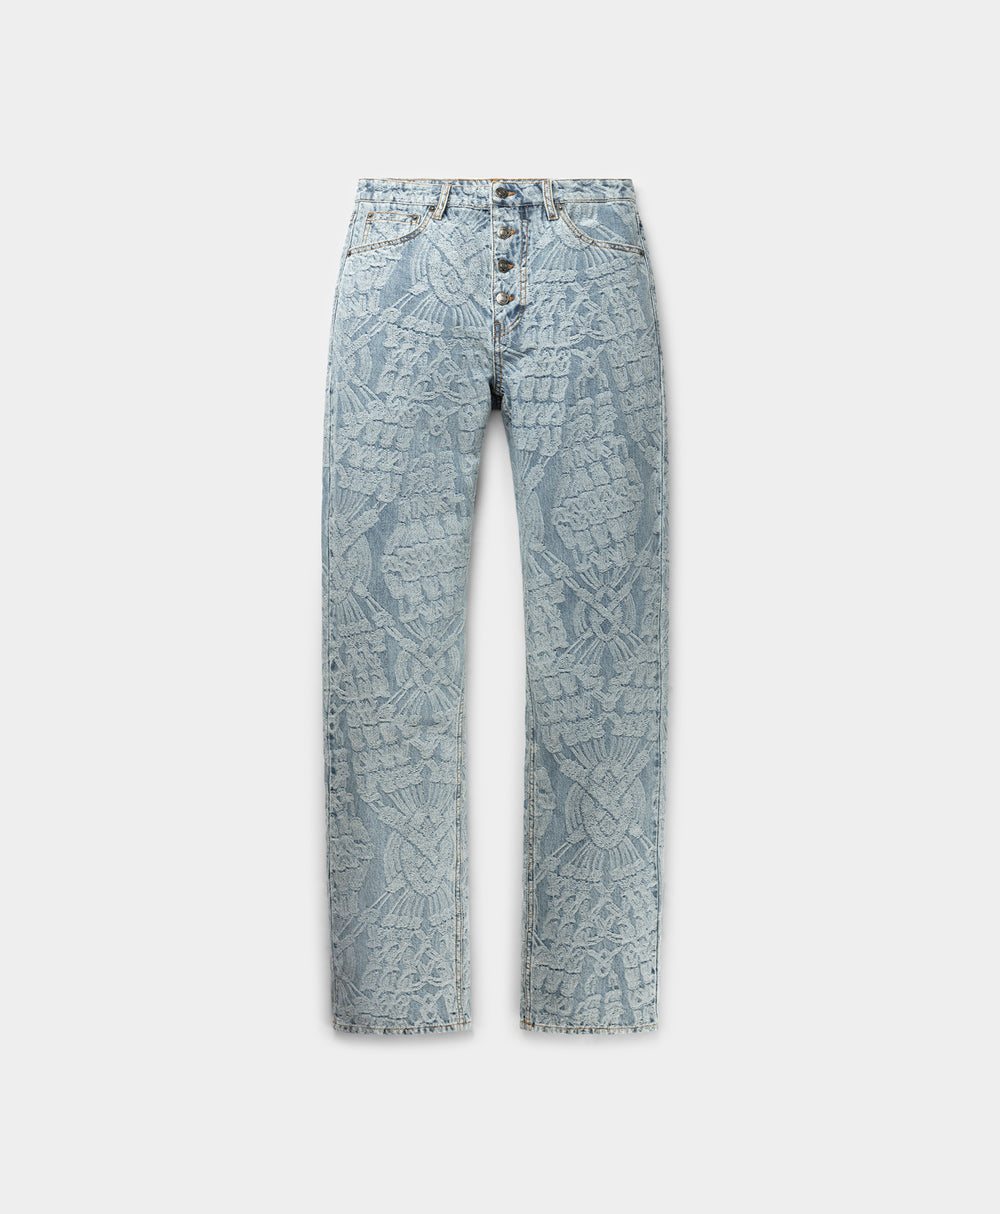 Jeans – Daily Paper Worldwide